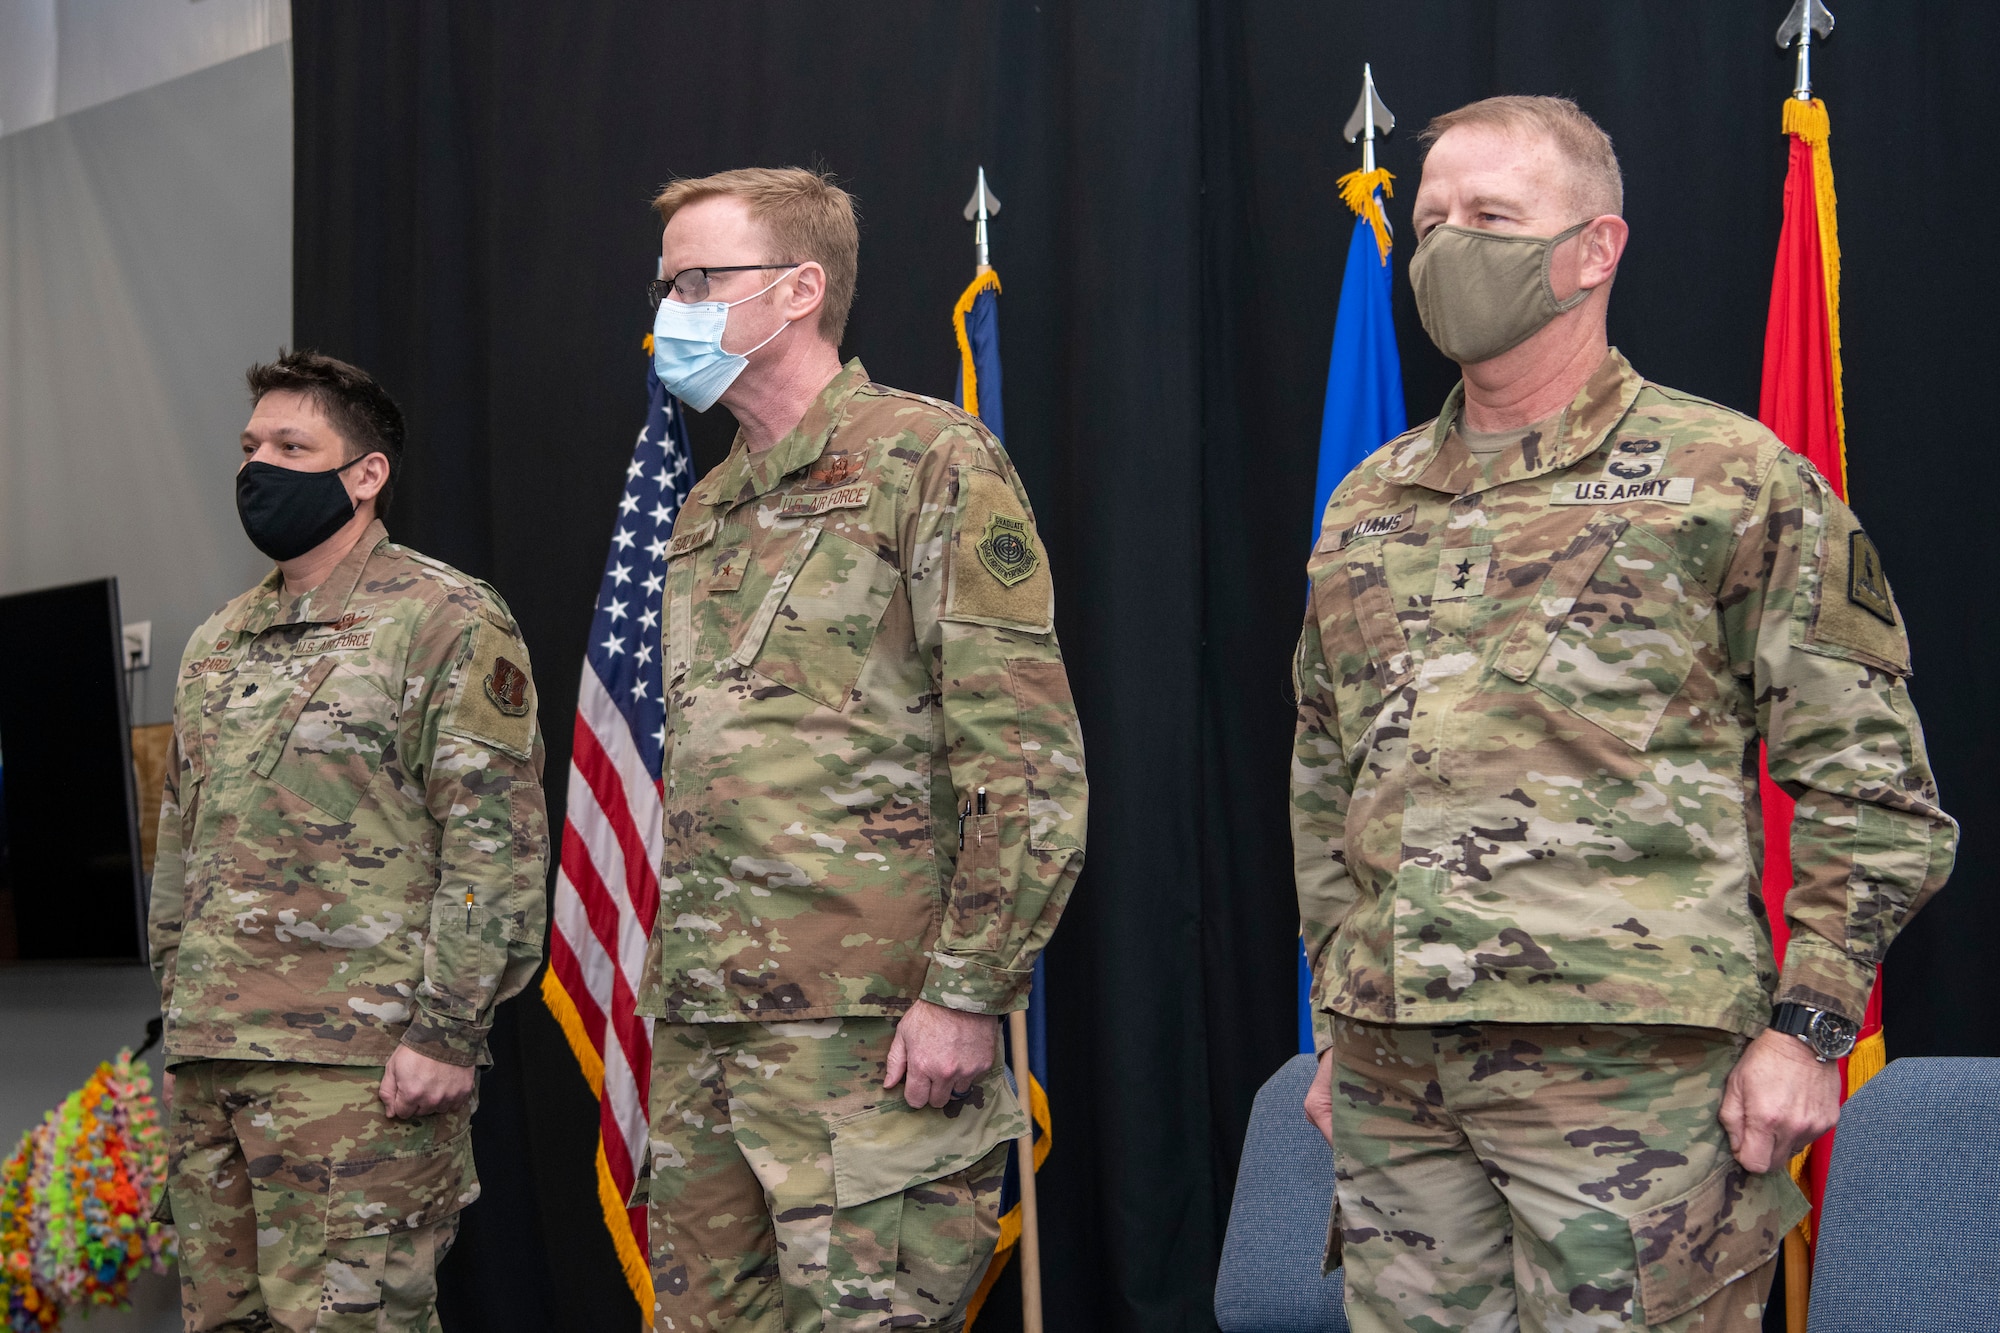 From right, Maj. Gen. Timothy P. Williams, the Adjutant General of Virginia, Brig. Gen. Bryan E. Salmon, the Assistant Adjutant General for Air National Guard Strategic Initiatives, and Lt. Col. Jonathan Esparza, 185th Cyberspace Operations Squadron commander, stand at attention on a stage during an end of mobilization ceremony Feb. 25, 2022, in Hampton, Virginia.